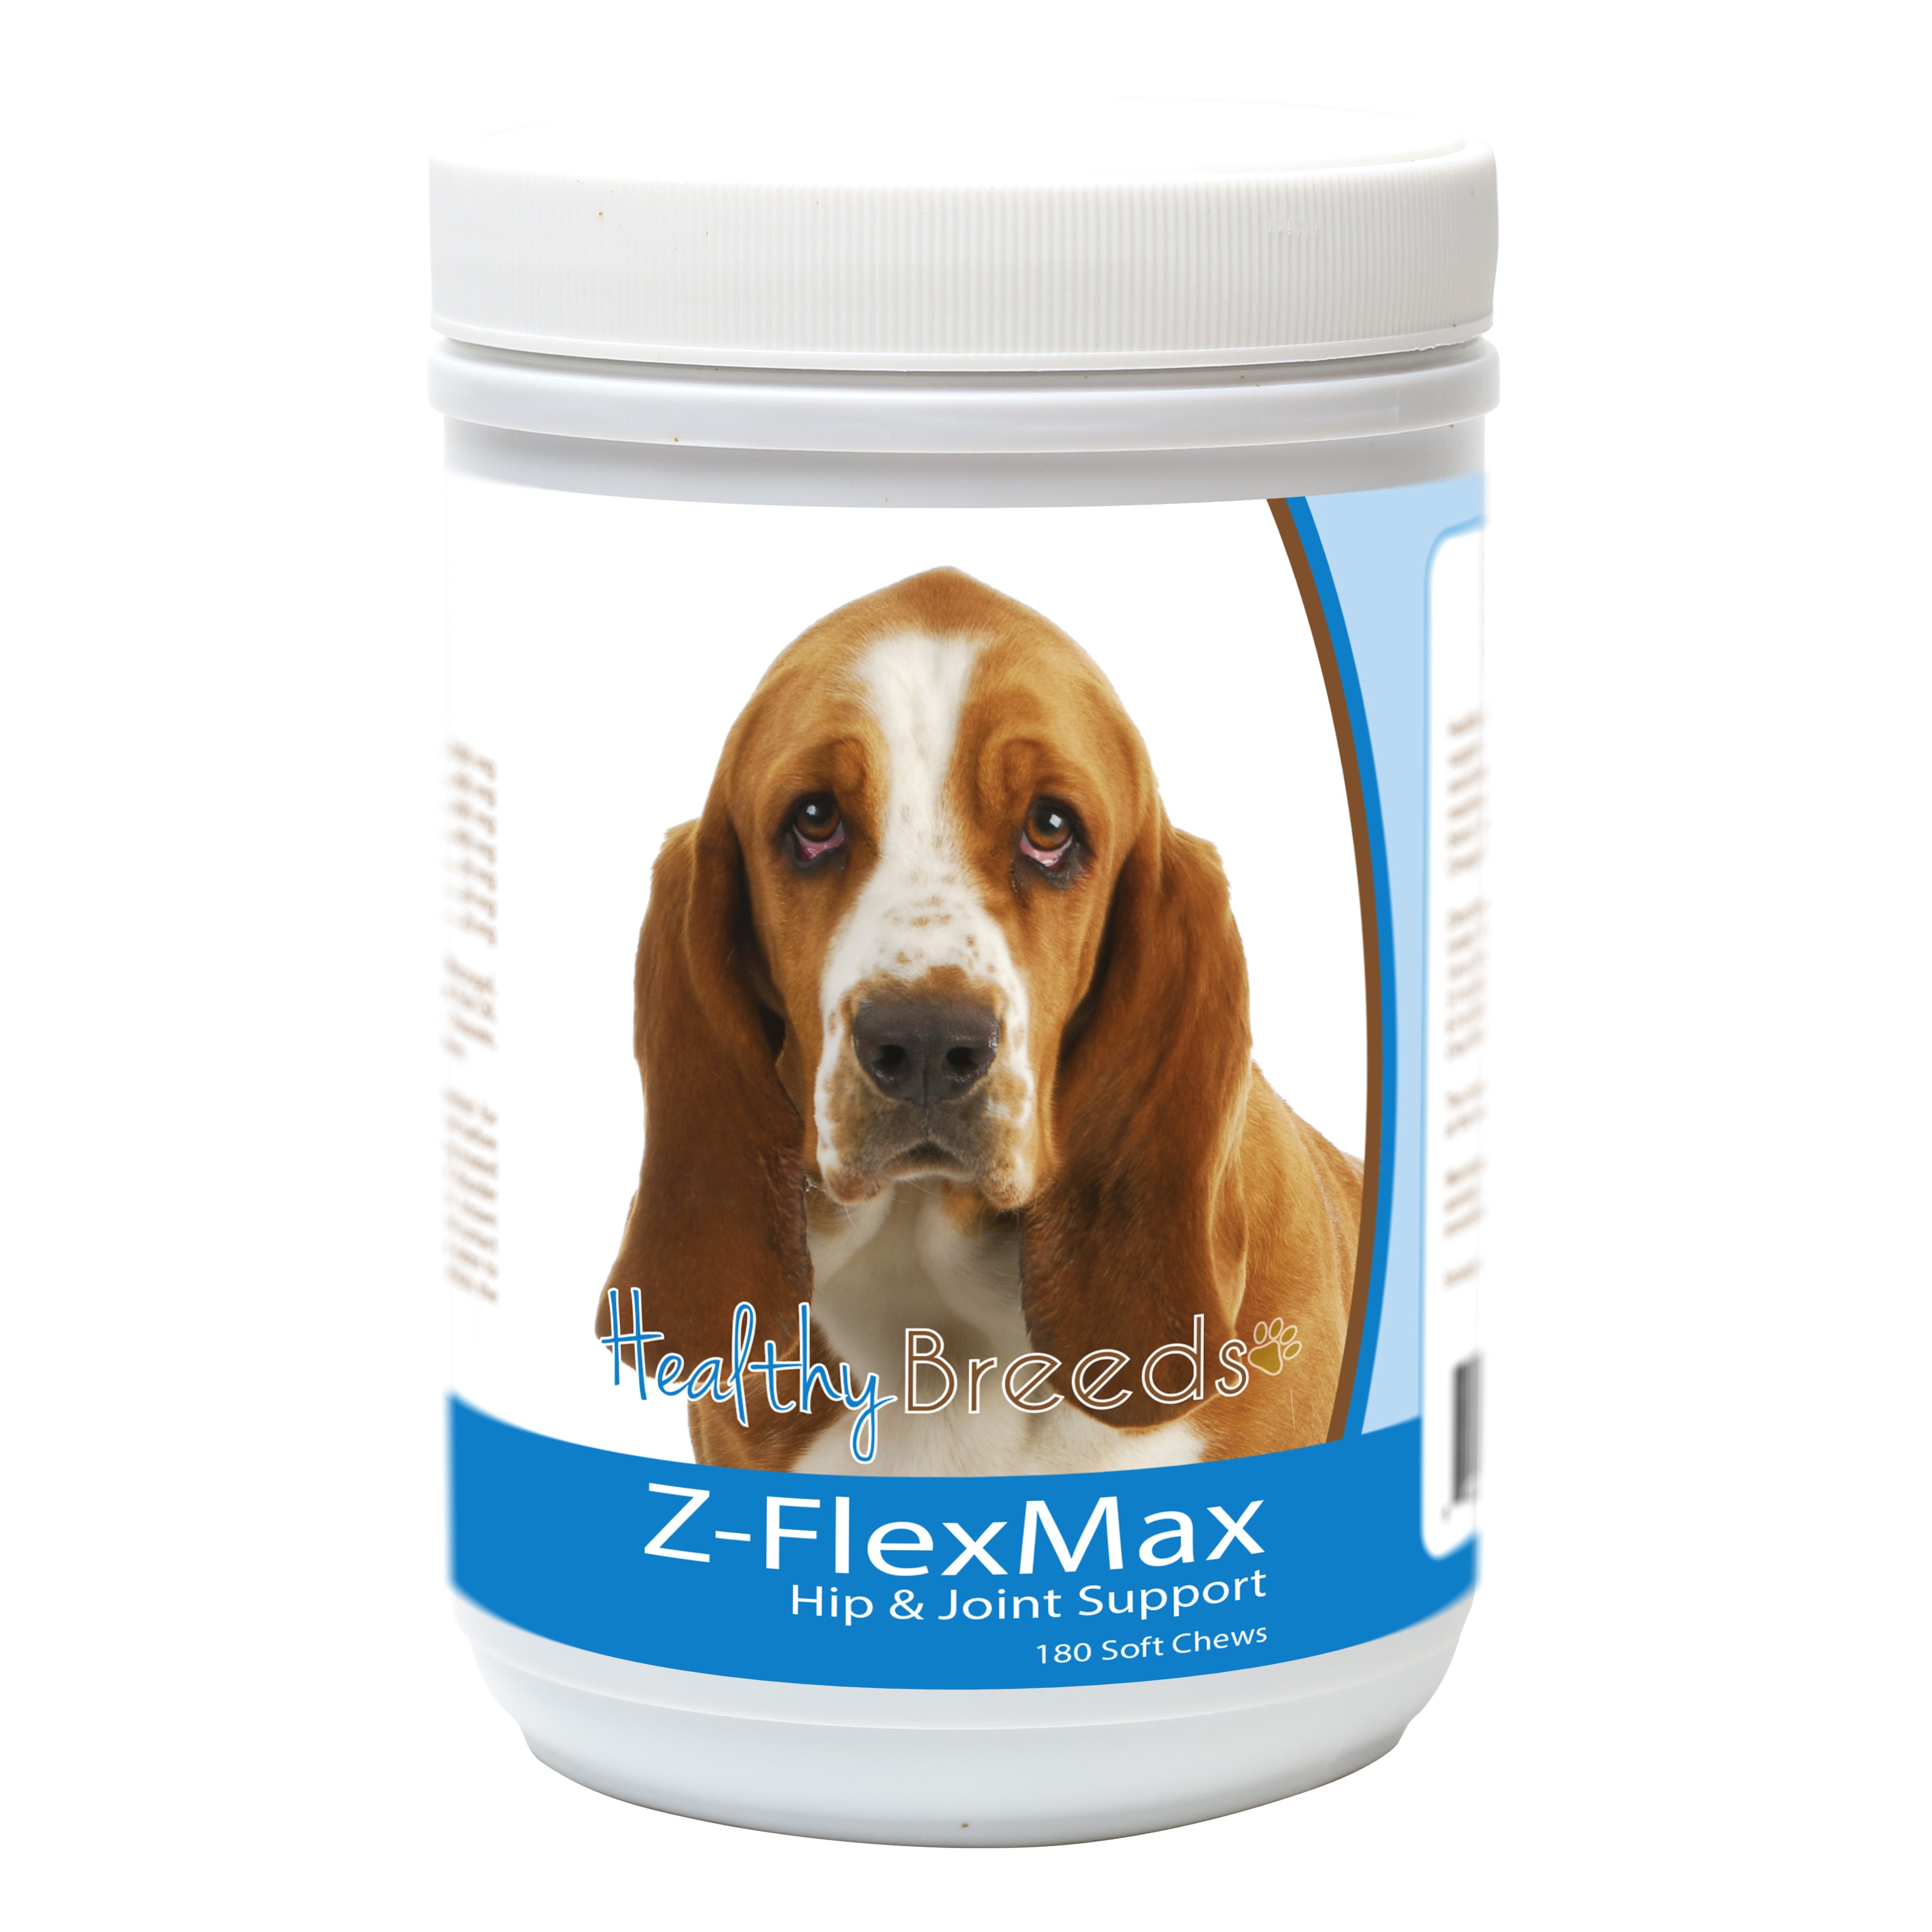 Basset Hound Z-Flex Max Dog Hip and Joint Support 180 Count